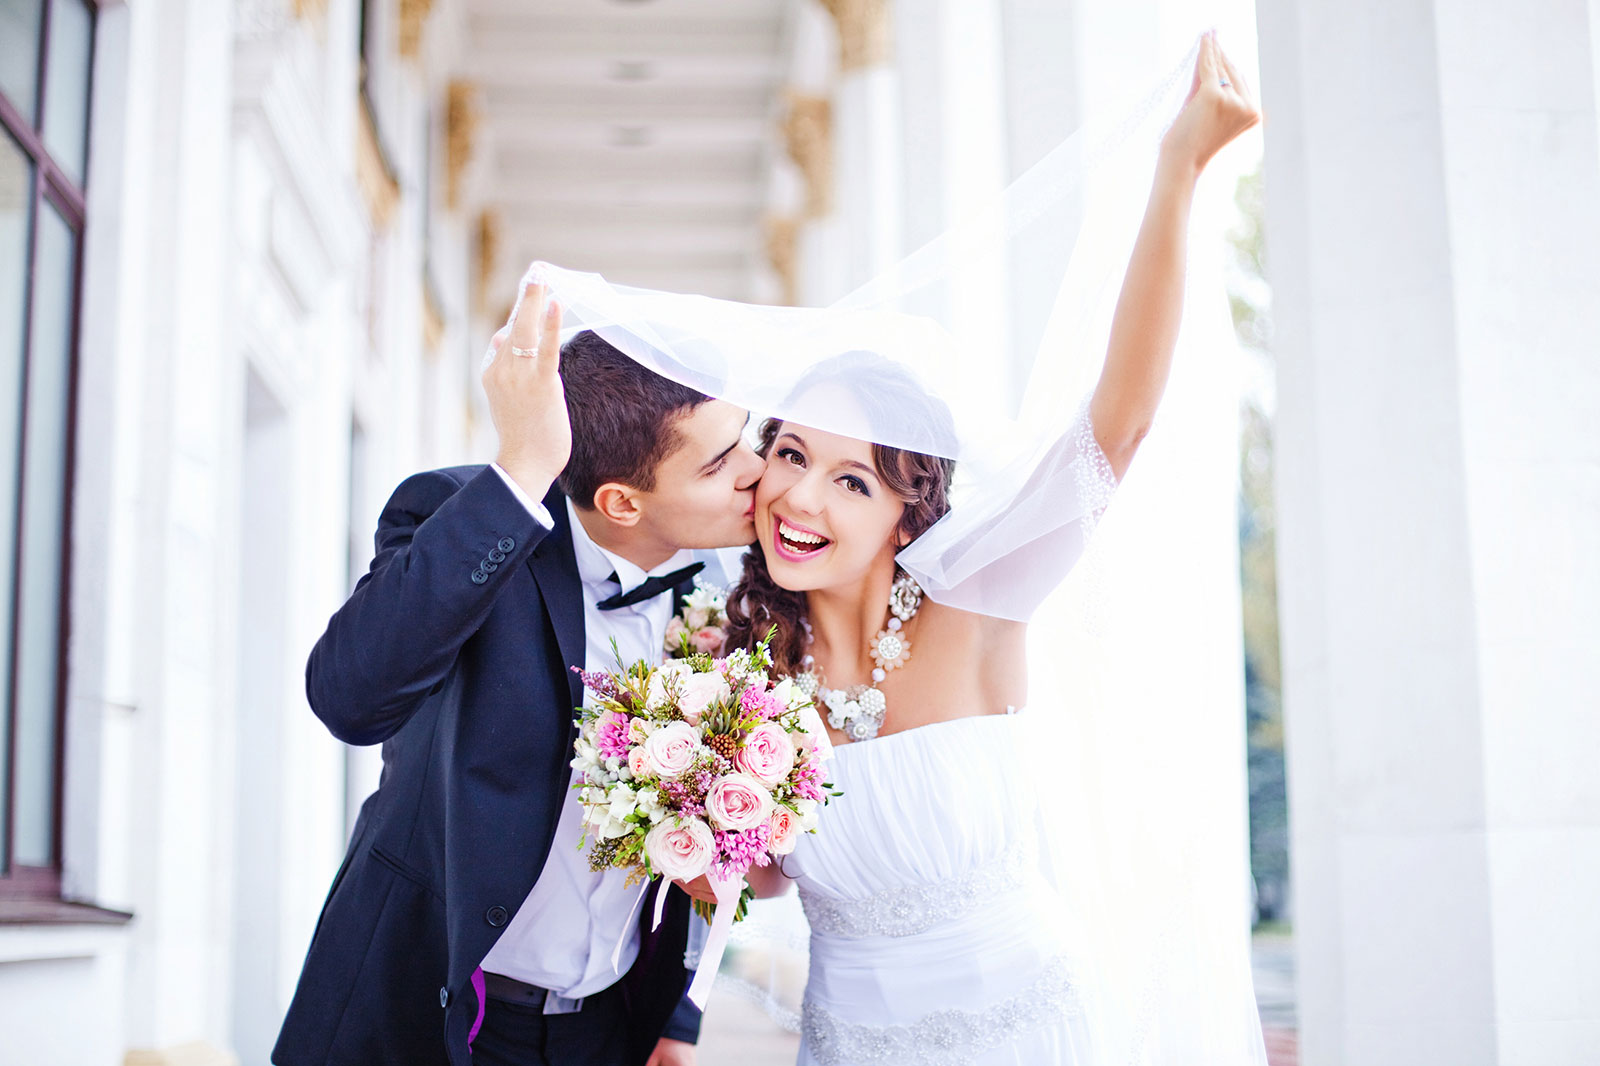 It’s Wedding Season in College Station! How to Get a Picture-Perfect Smile for a Trip Down the Aisle